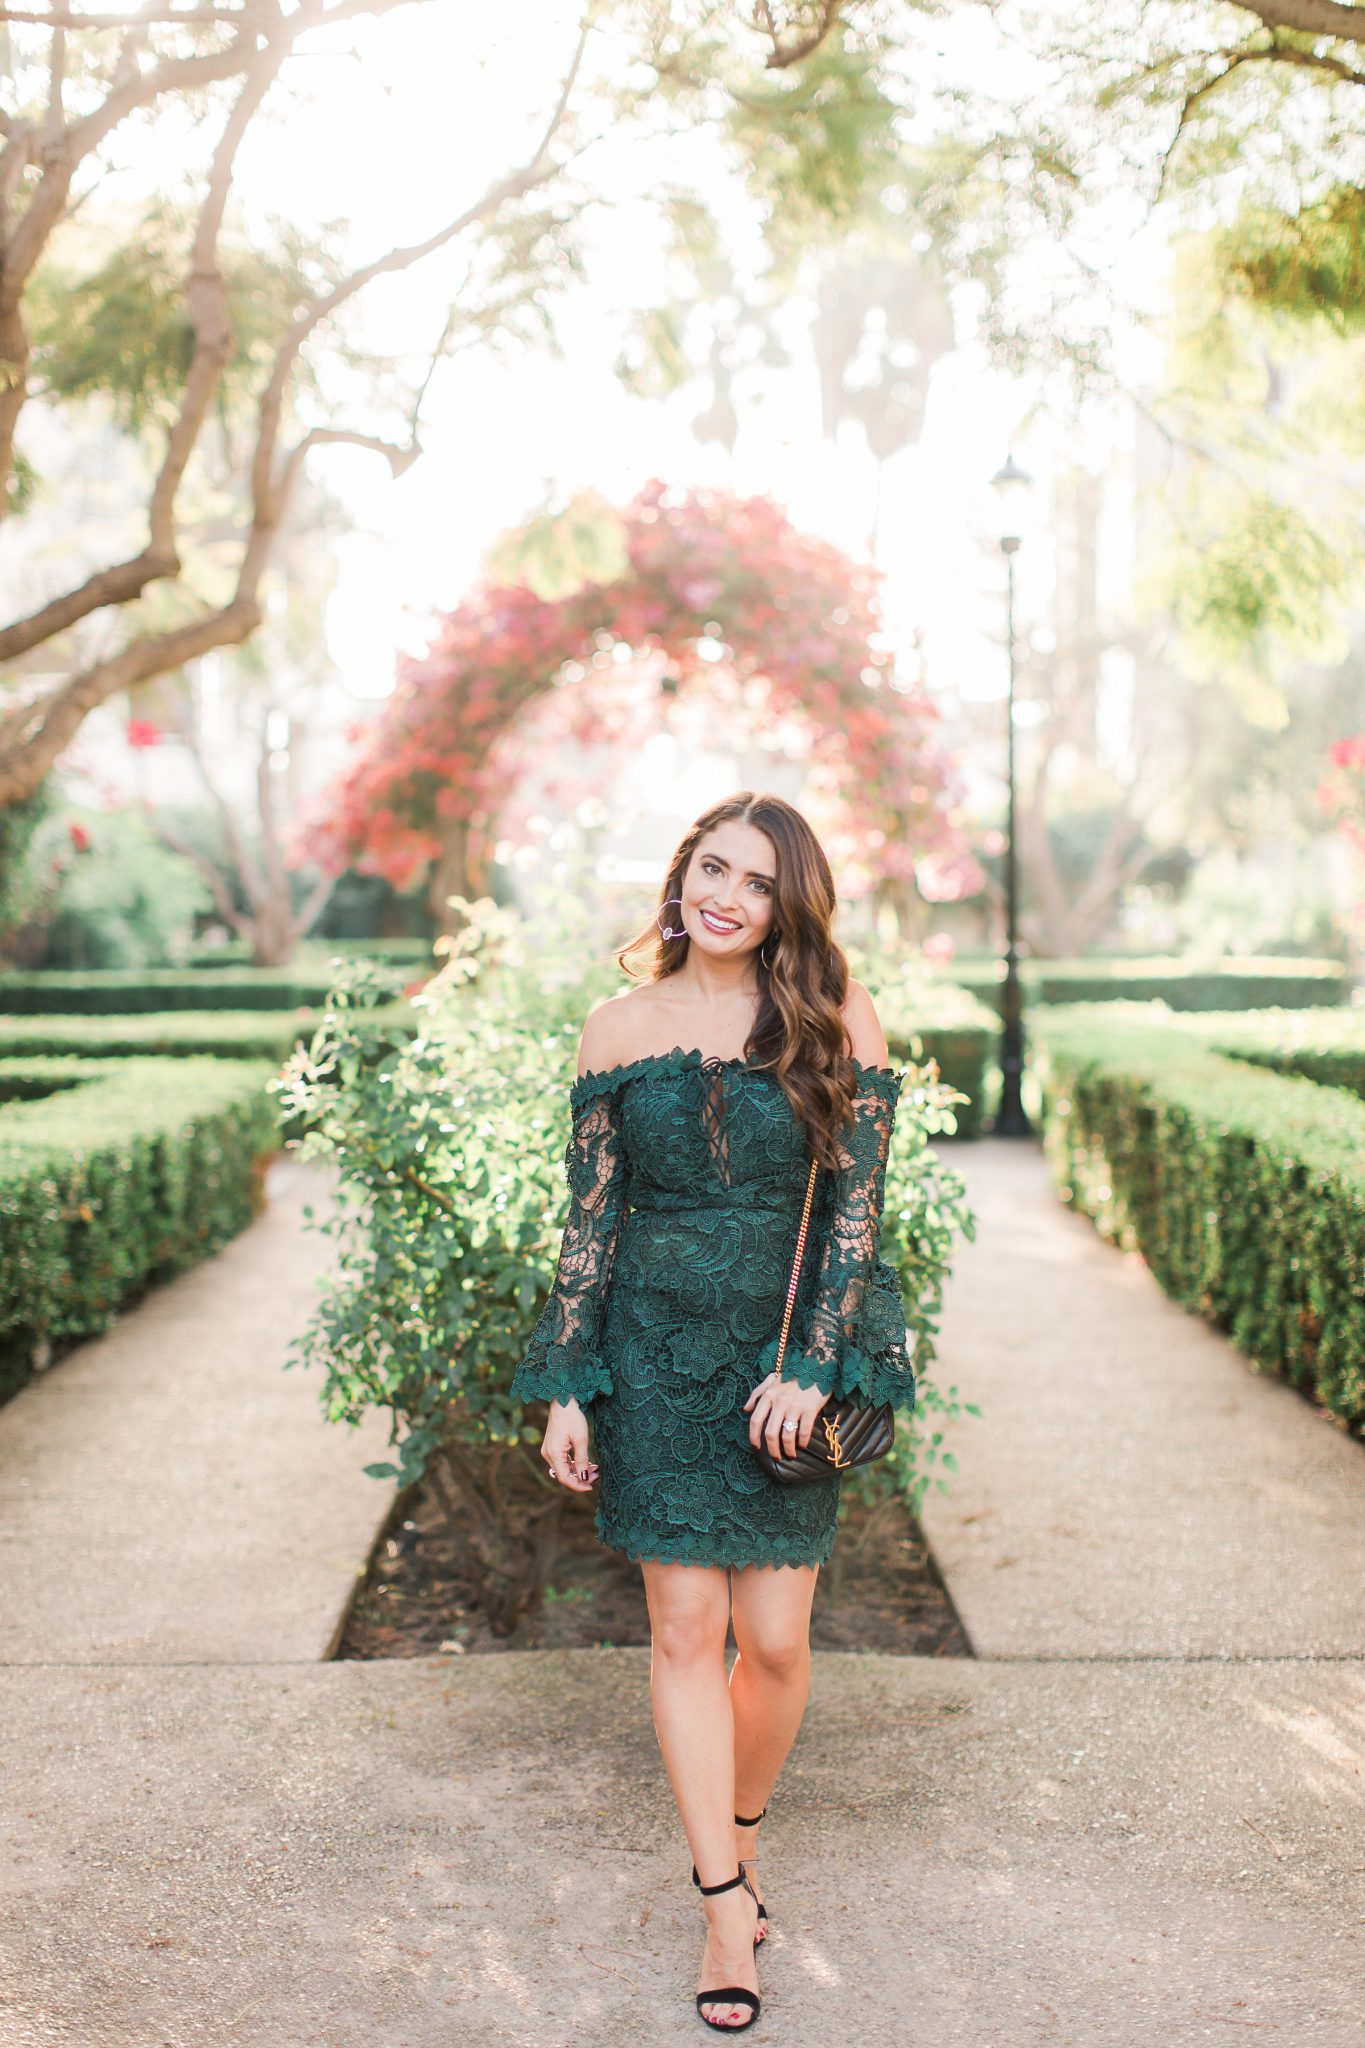 Maxie Elle | Lace emerald off the shoulder dress - The Best NYE Dresses by popular Orange County style blogger Maxie Elle